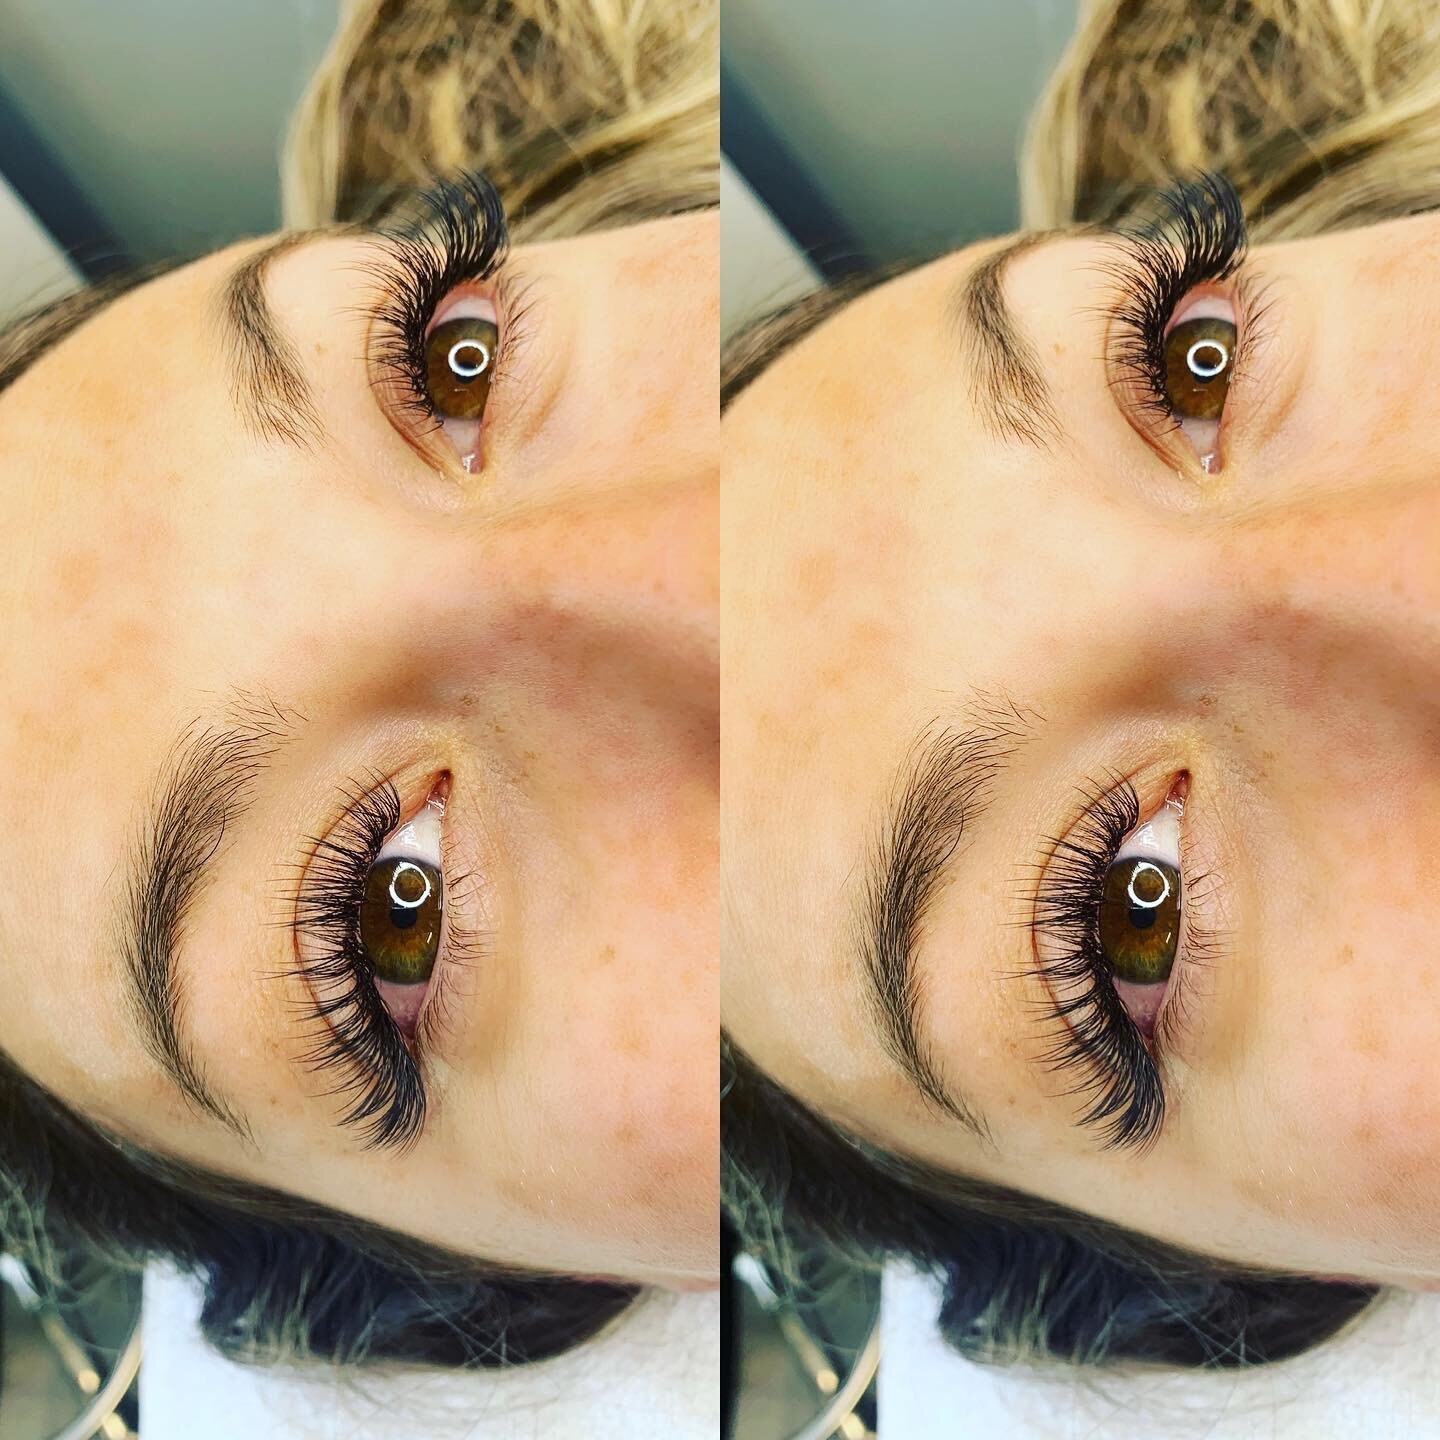 Hybrid wispy lashes on @thelifeofjessicaa ❤️
__________________________
* 📆 By appointment only * Book online www.beautybymarilyn.com
* Any questions 📲 text. (714) 814-7288
📍8550 Garden Grove Blvd #213  Garden Grove Ca 92844